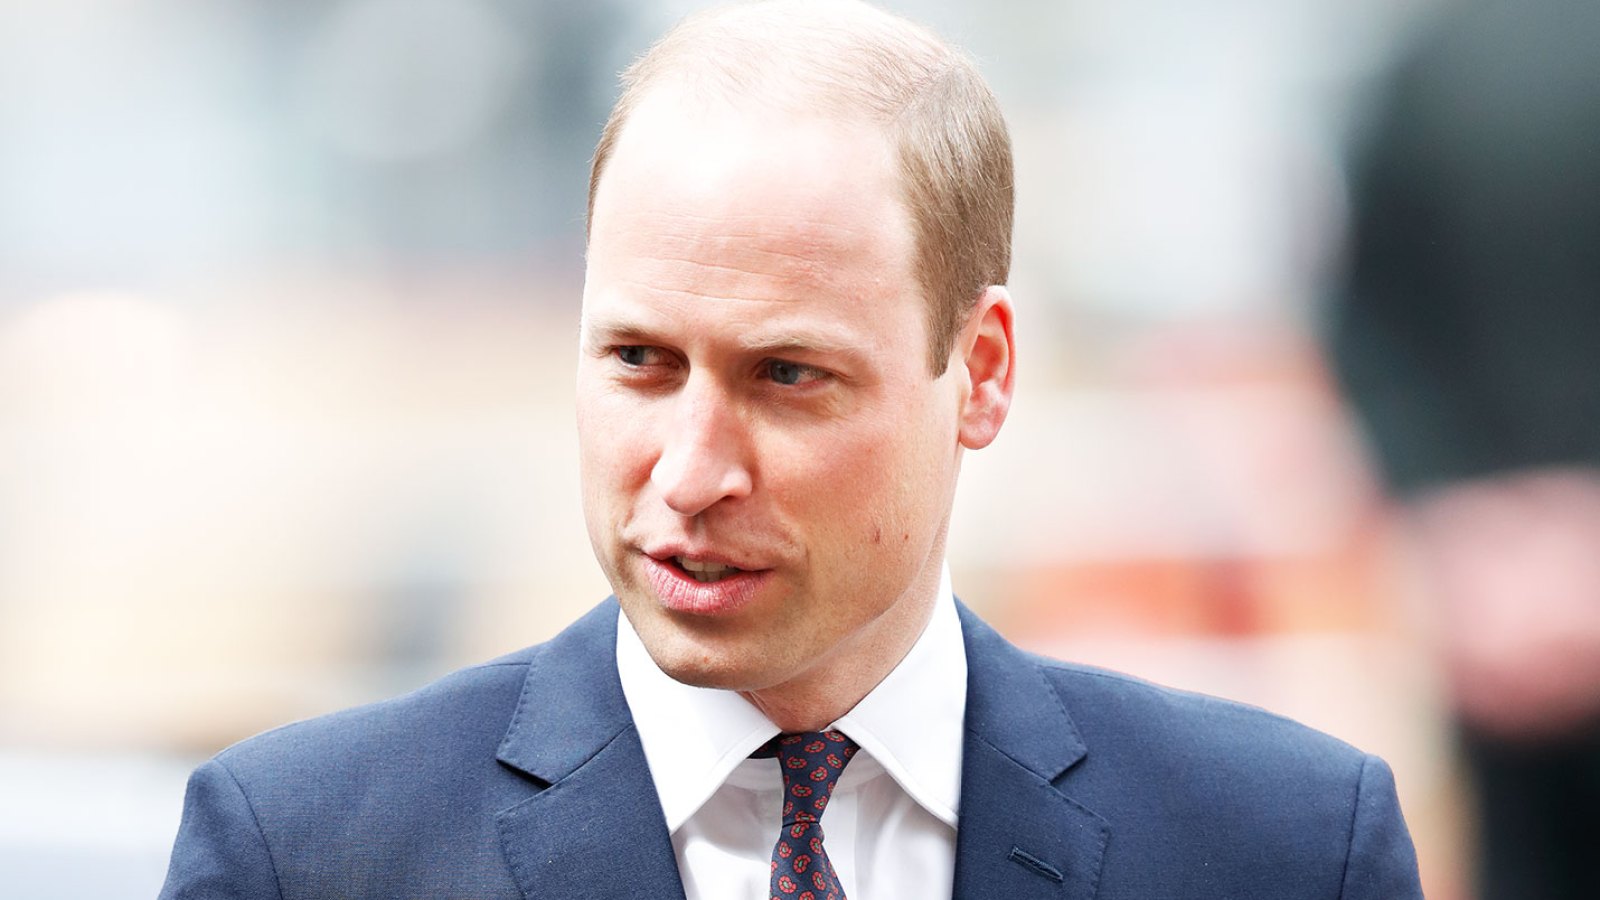 Prince William Booed at Westminster Abbey Service as Protestors Gather